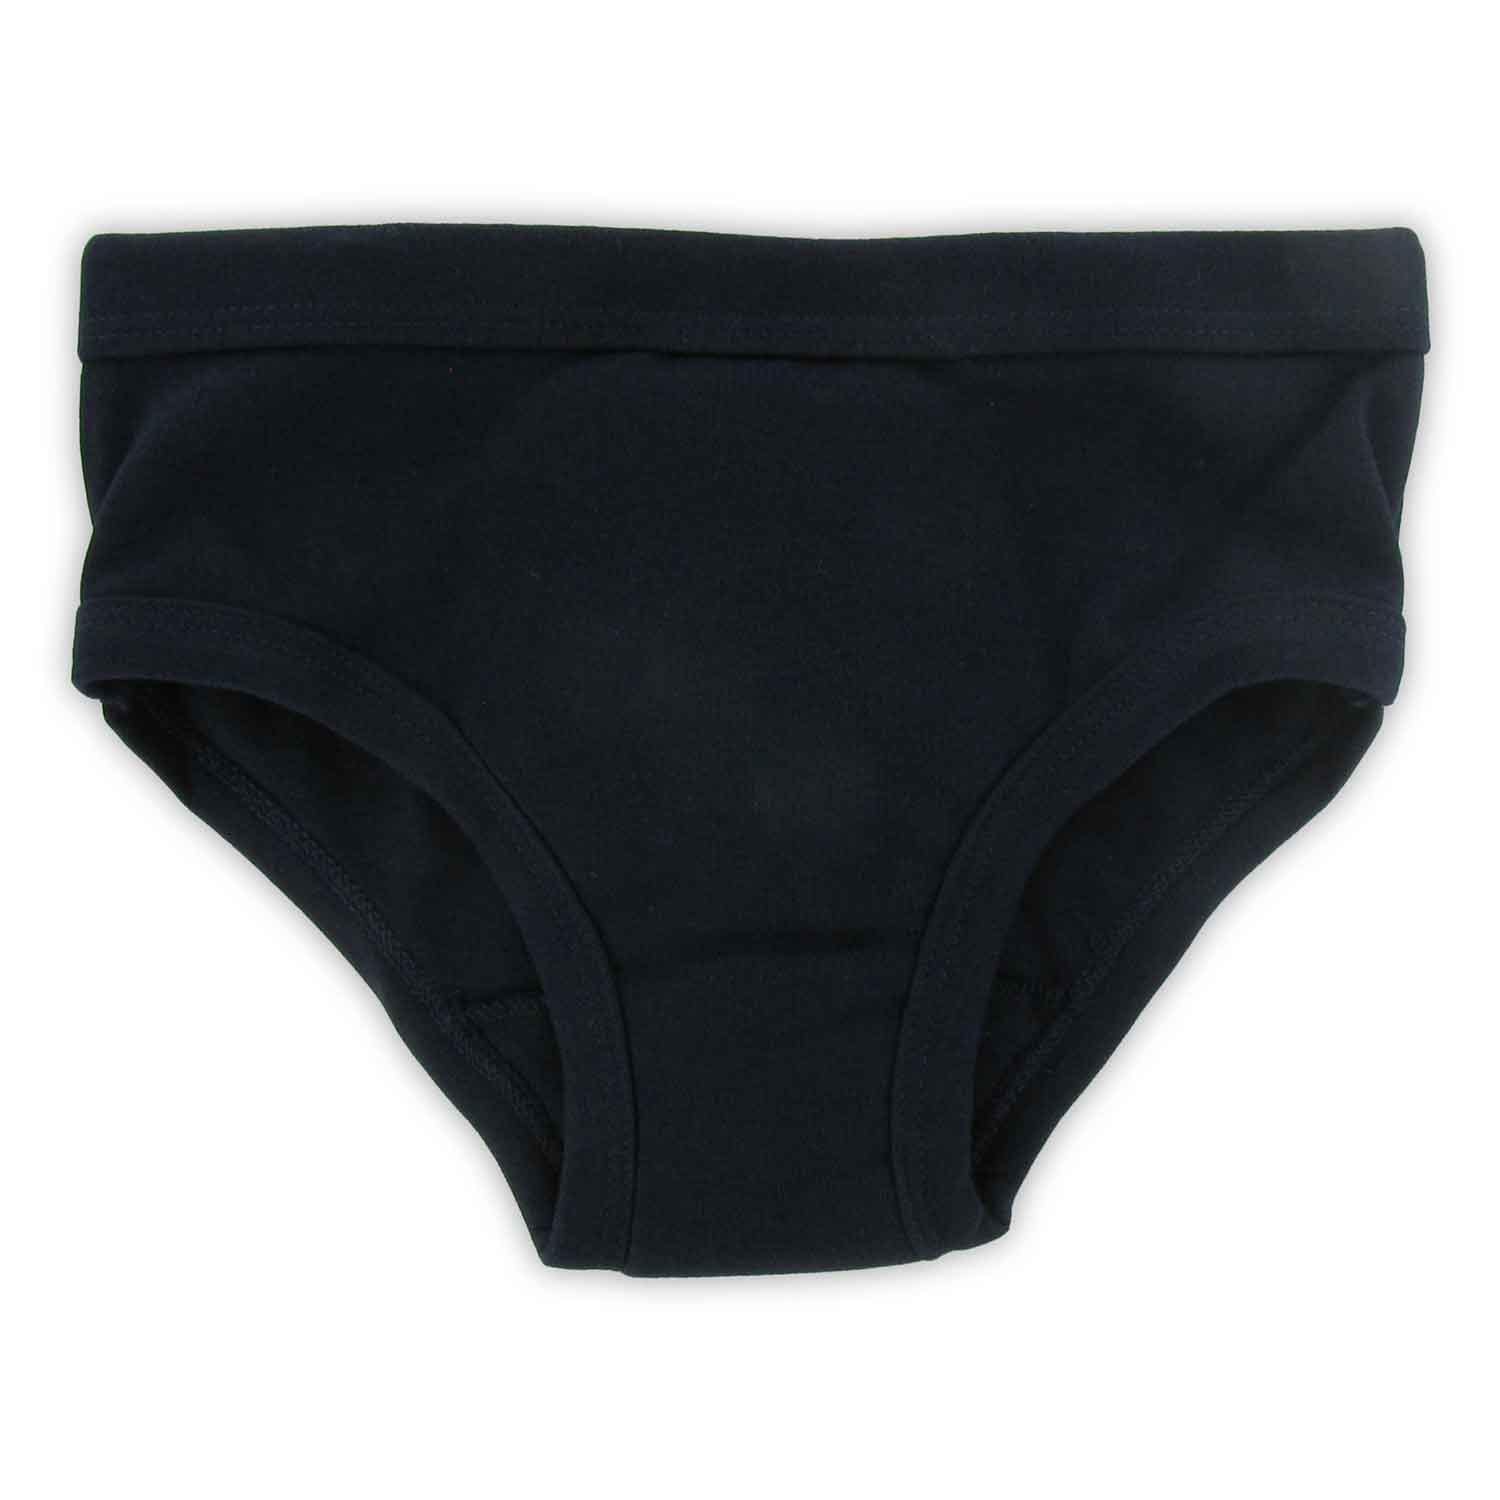 Reusable Incontinence Underwear: Pros And Cons - National